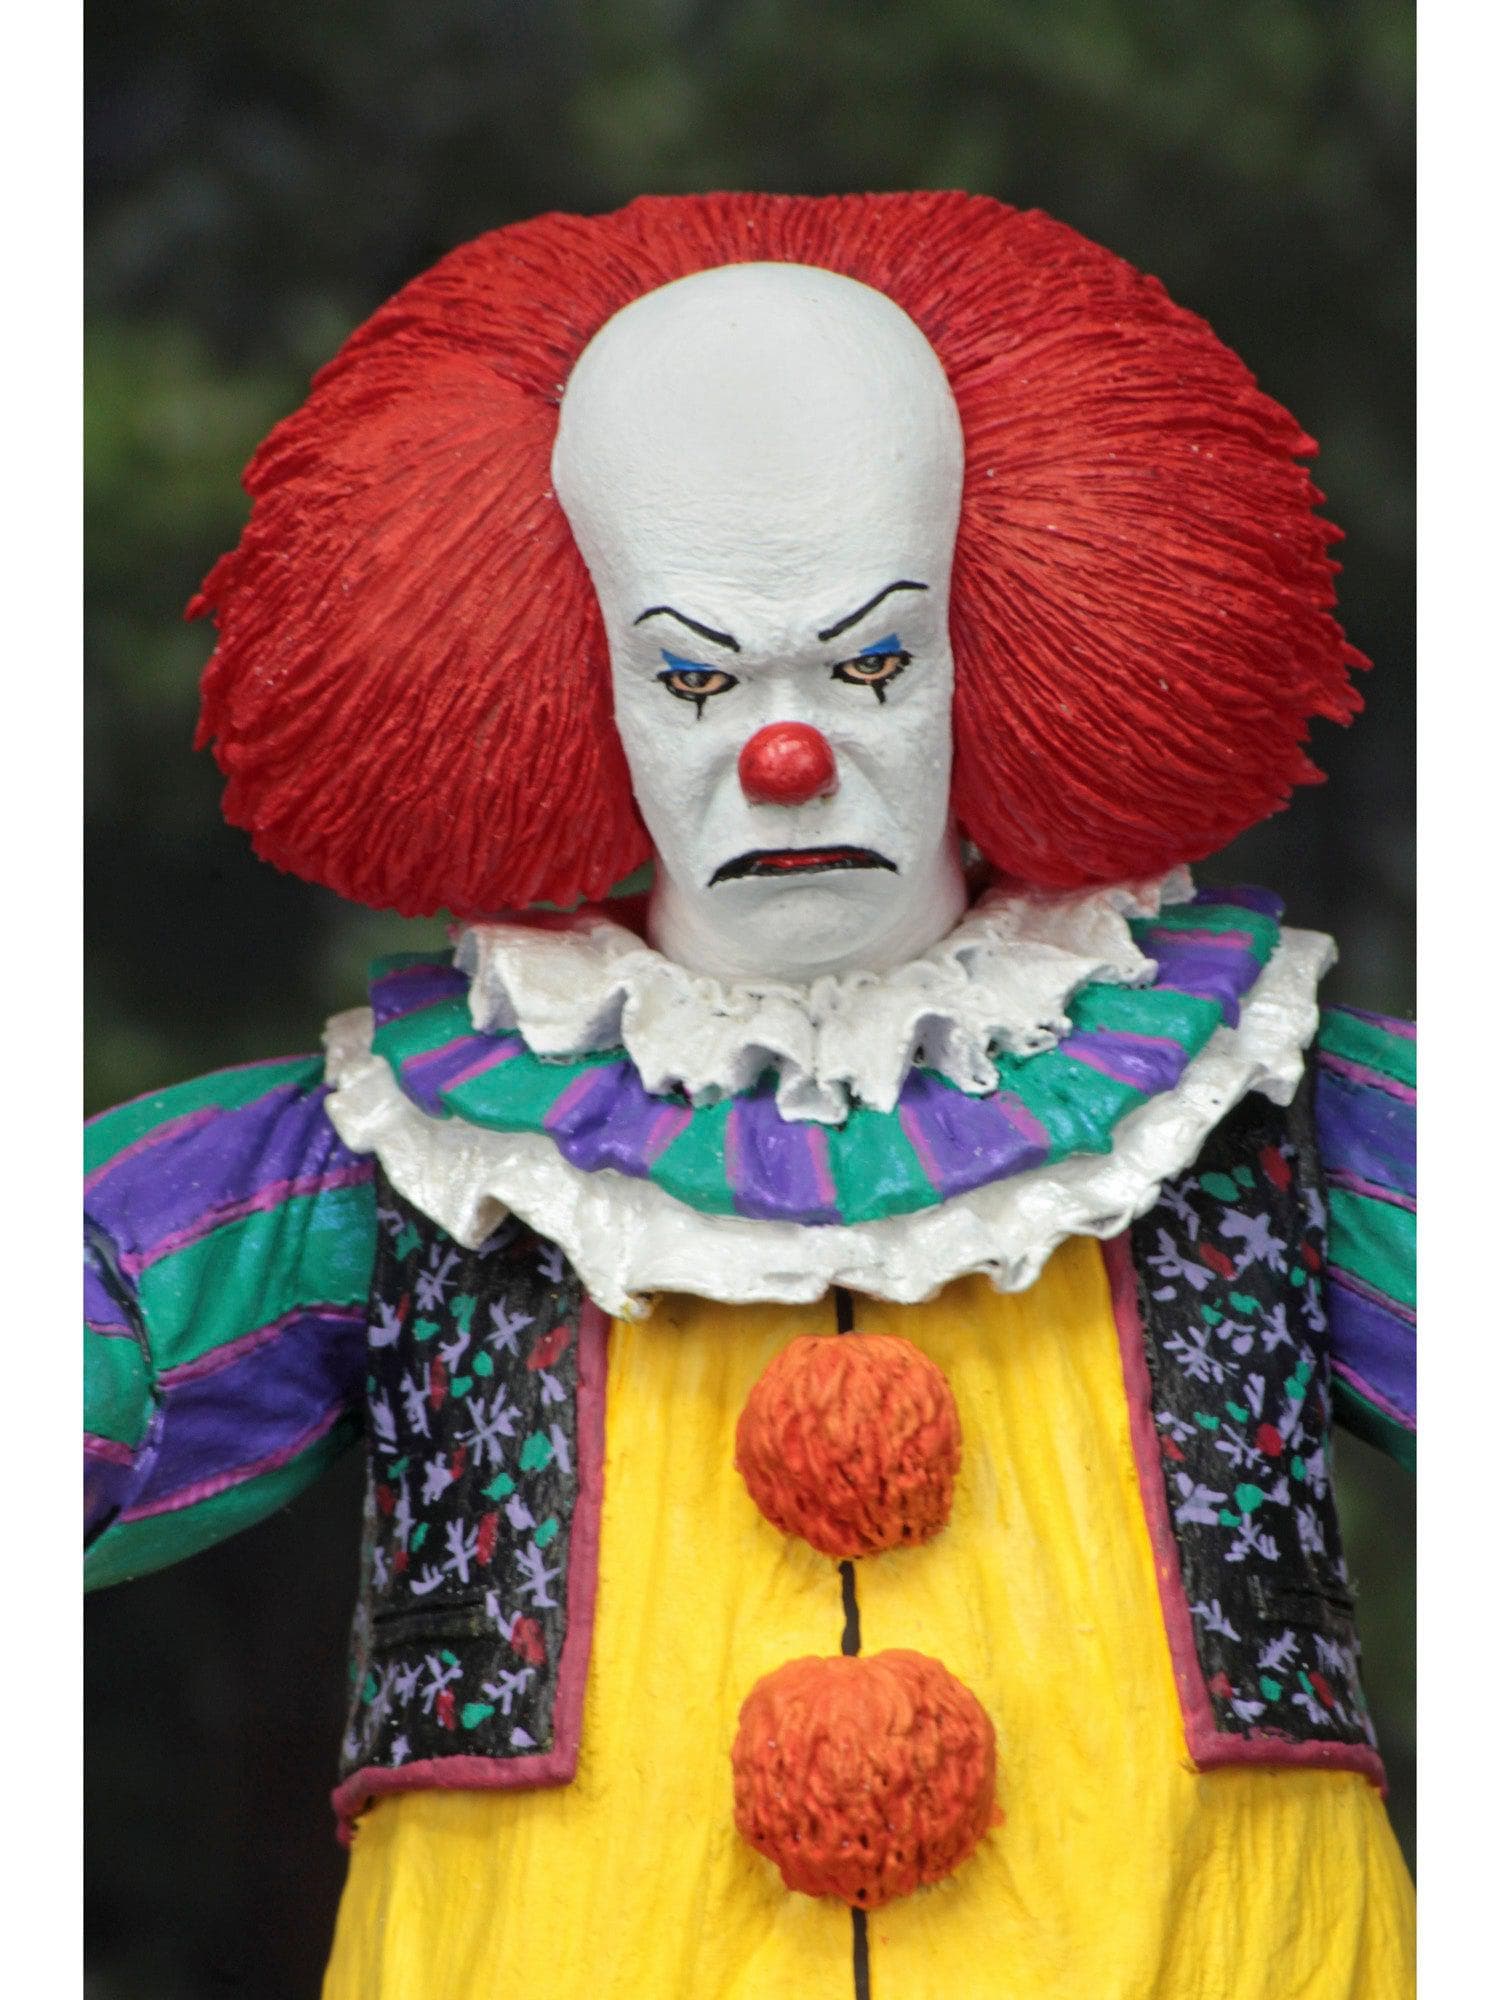 NECA - IT - 7" Action Figure - Ultimate Pennywise 1990 - costumes.com